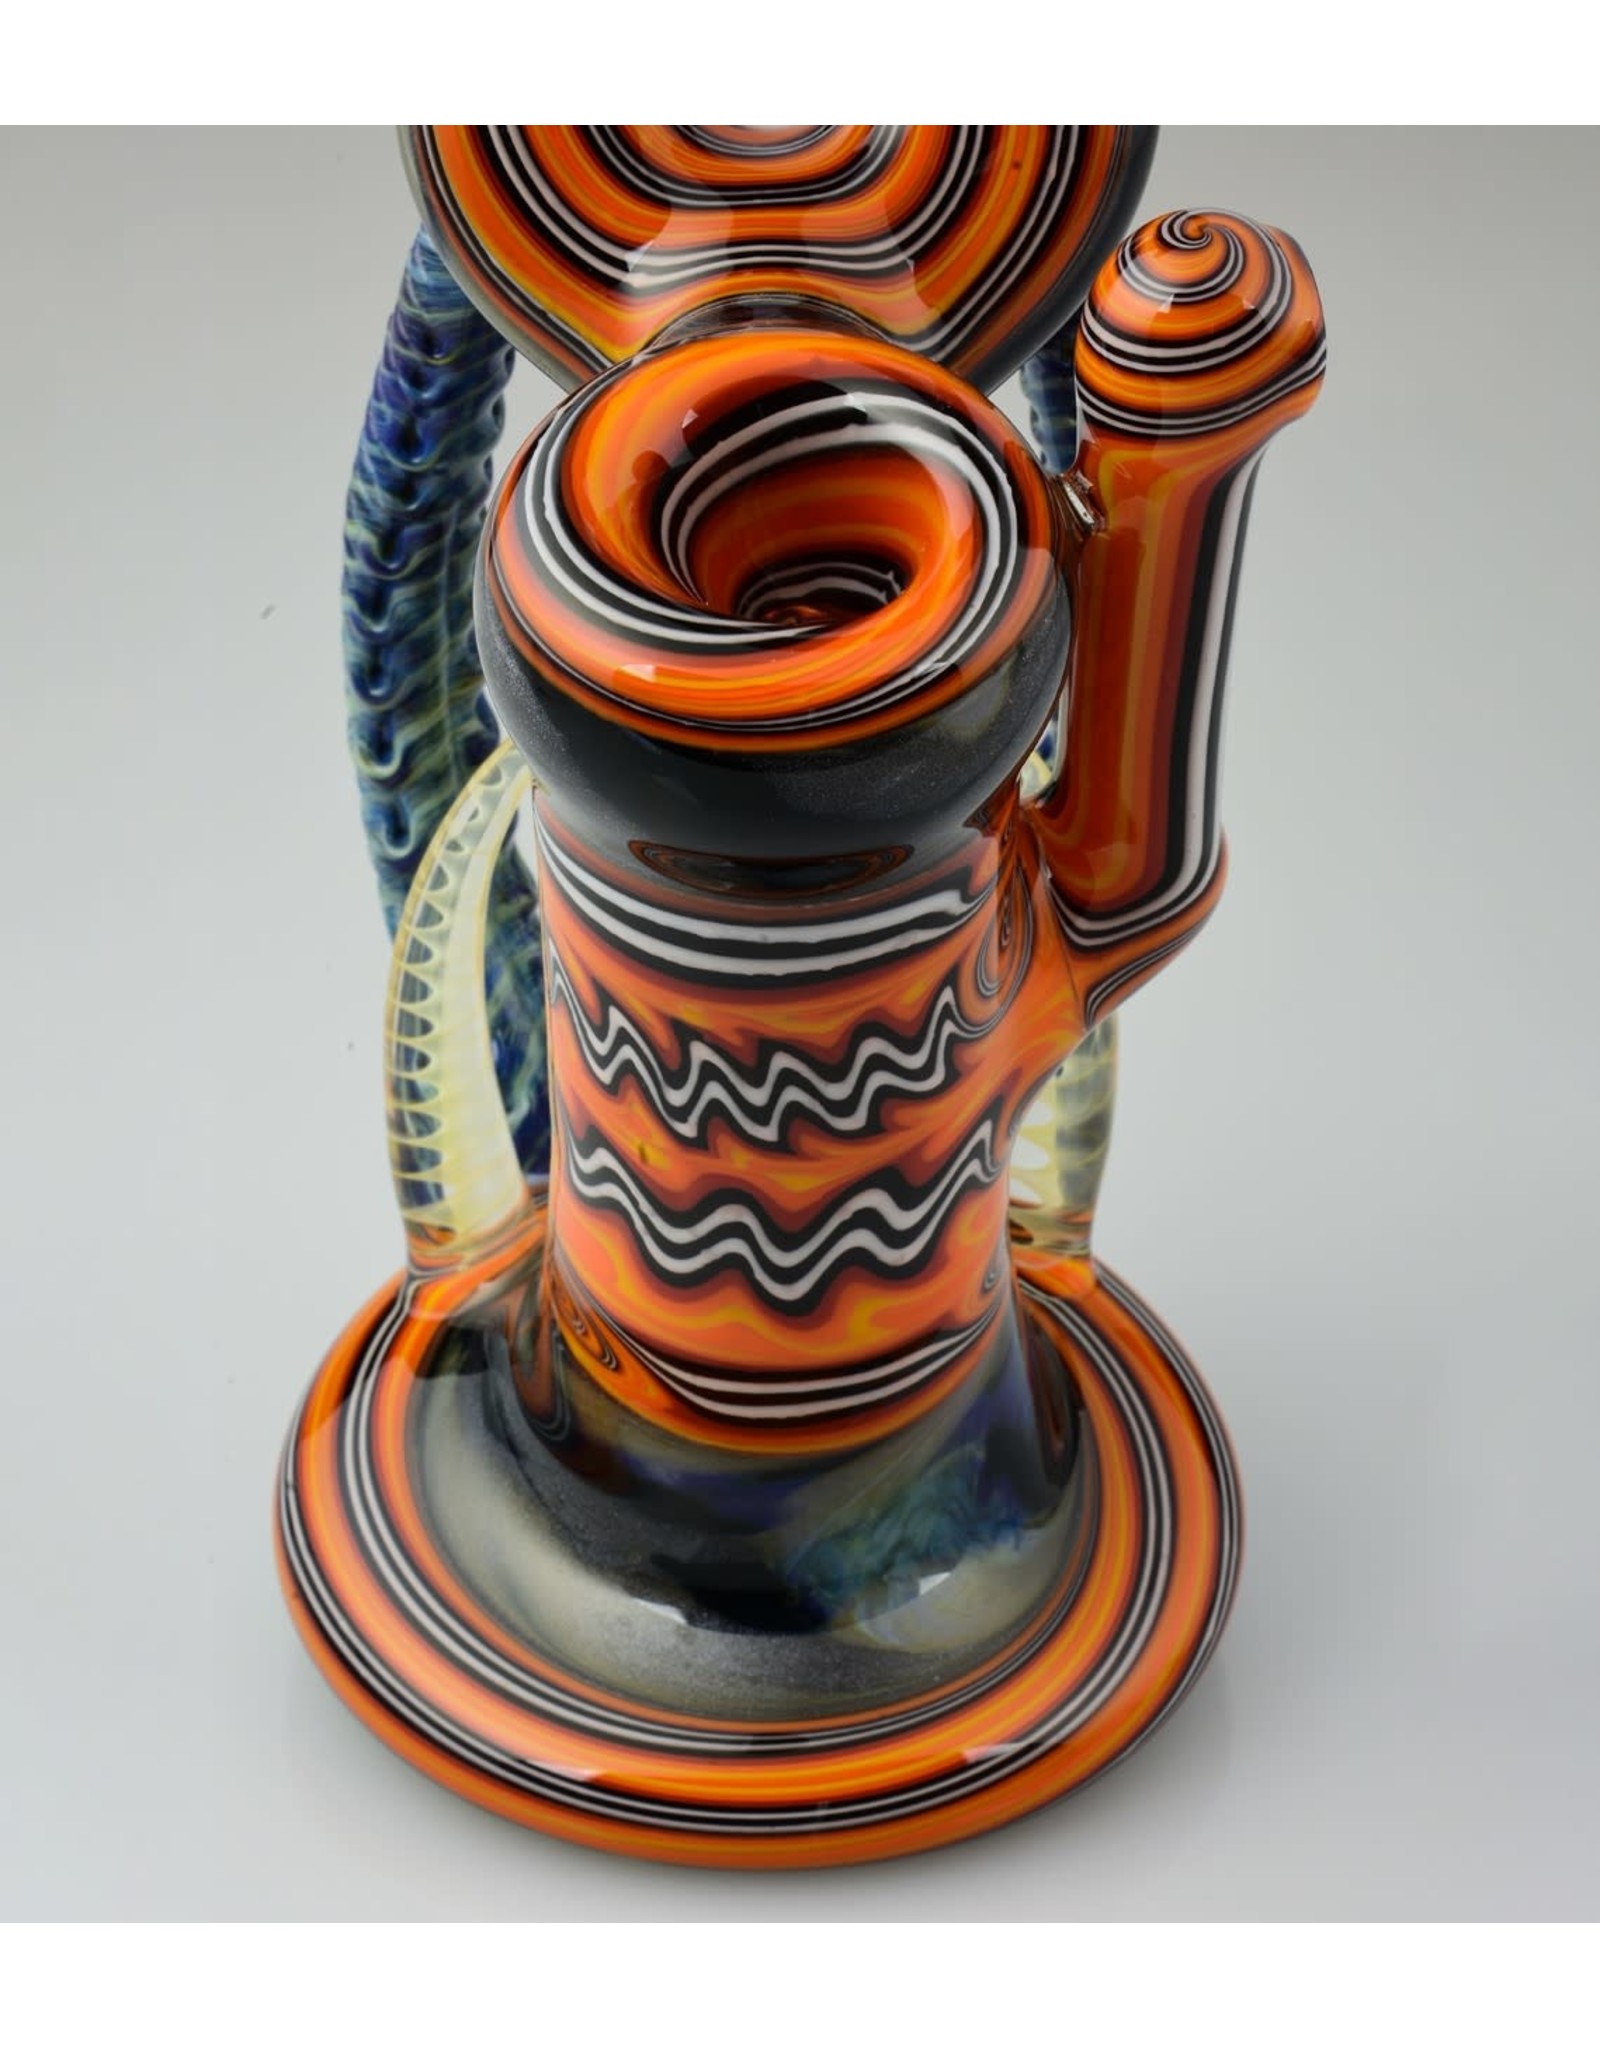 Icke Ickie Worked Fire LRG Sherlock Bub With Donut Under Mouthpiece And Facet Marble On Base